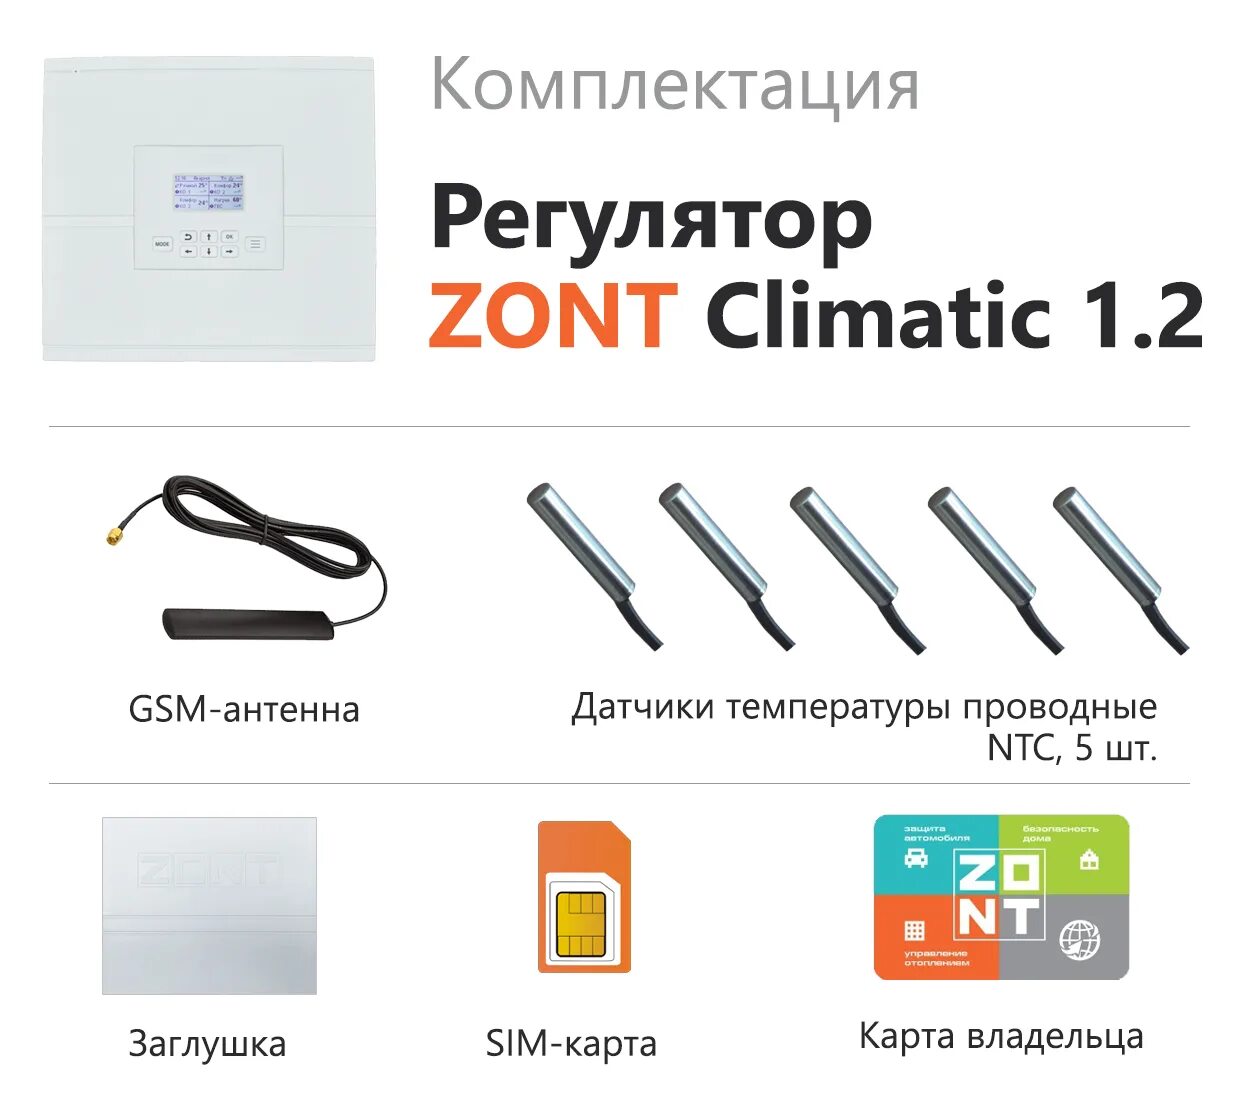 Zont climatic 1,3 автоматический регулятор ml00004486. Контроллер Zont climatic 1.2. Автоматический регулятор Zont climatic 1.2. Регулятор погодозависимый Zont climatic 1.3. Zont wifi